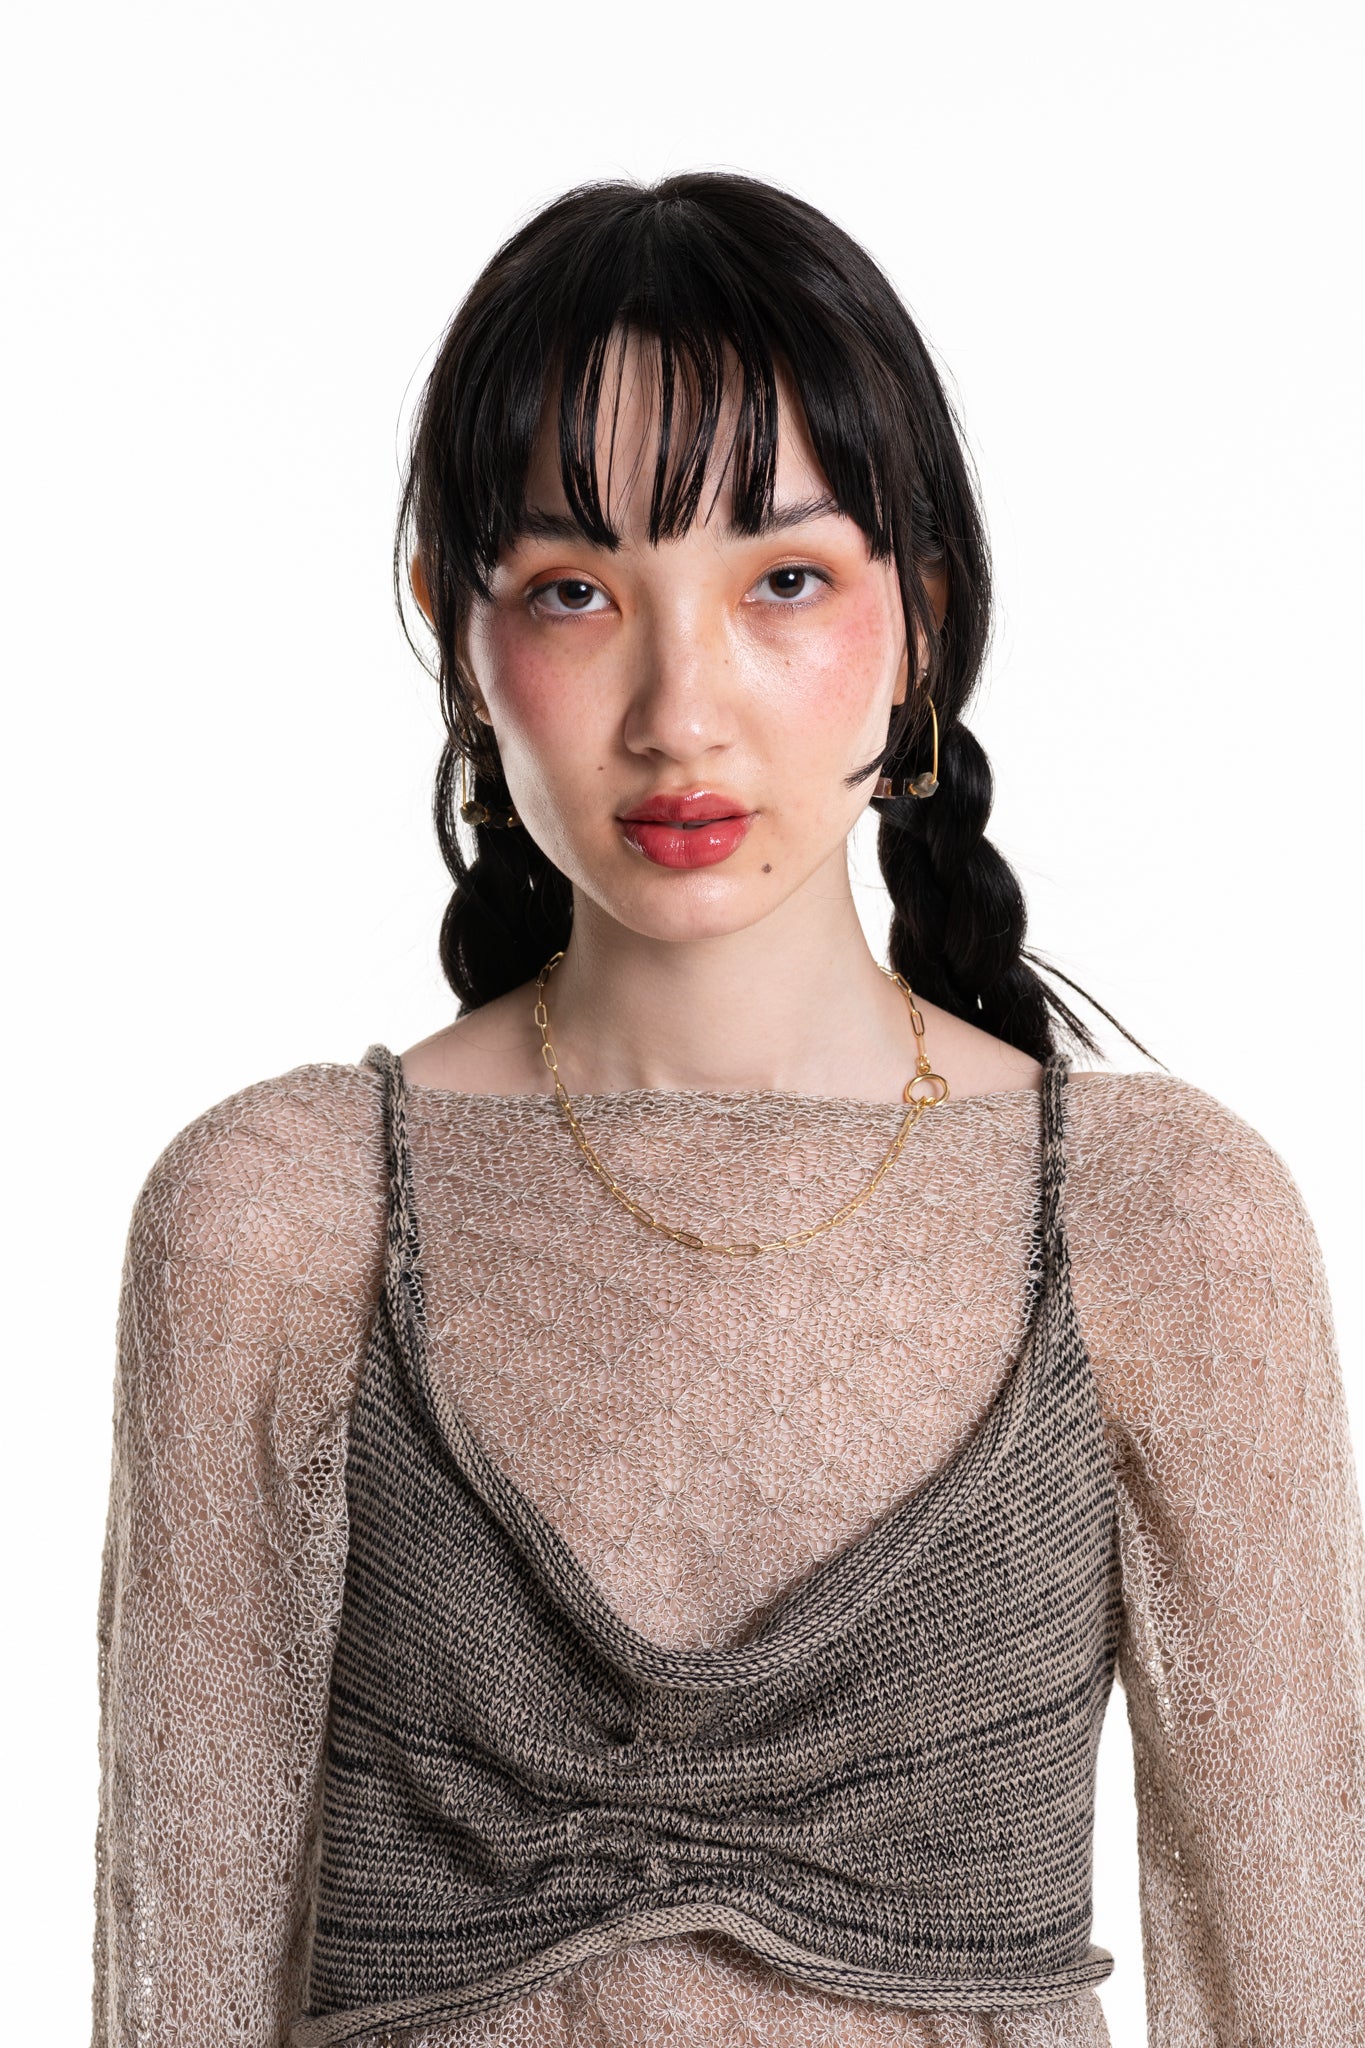 Tuck-Lace Sheer Knit Sweater - heyzoemay